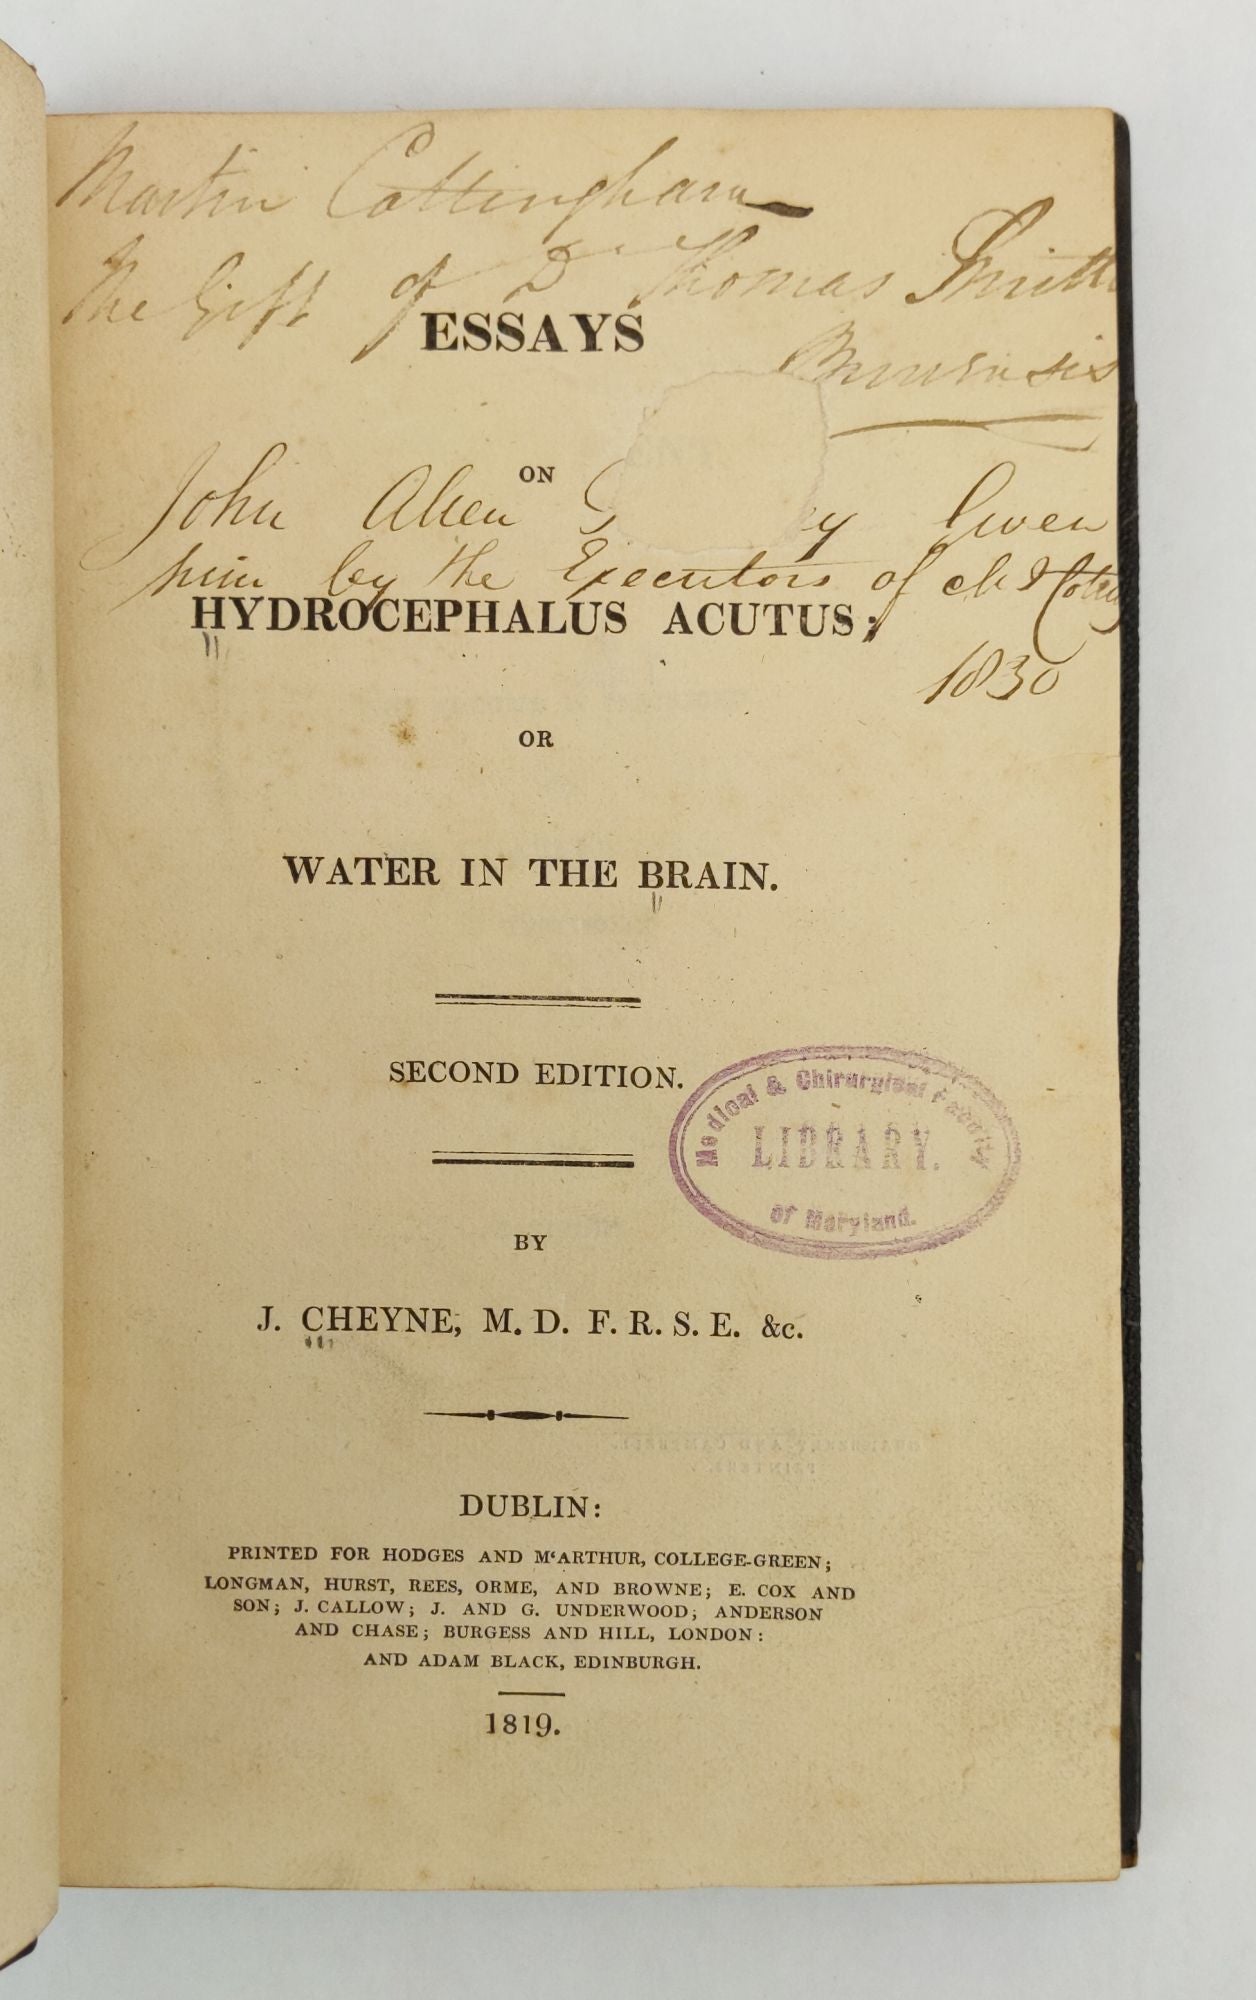 Product Image for ESSAYS ON HYDROCEPHALUS ACUTUS; OR WATER IN THE BRAIN